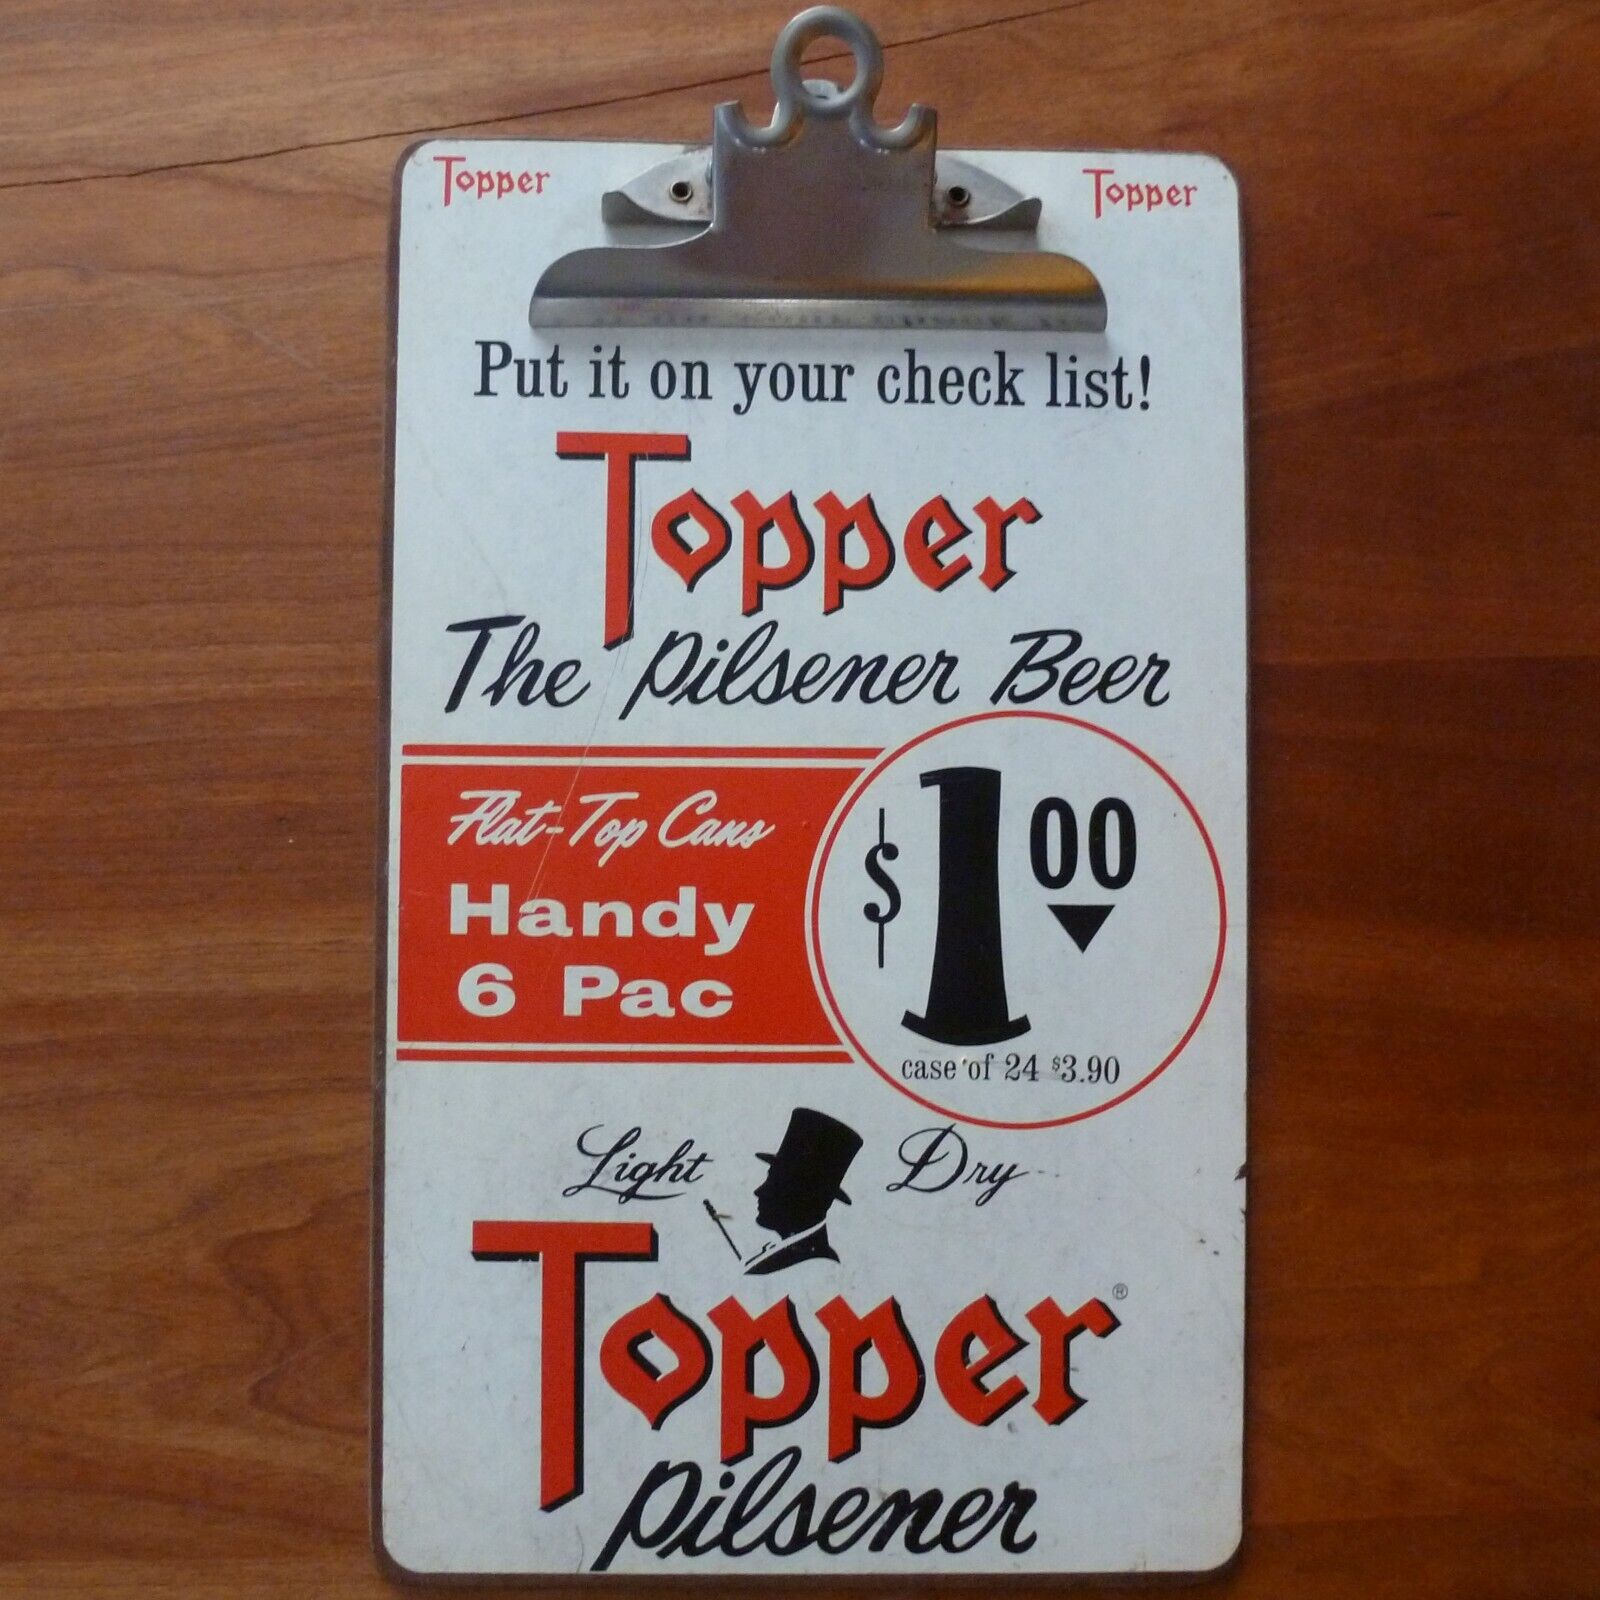 Scarce 1950s to Early 60s Topper Pilsner Restaurant/Bar Clipboard - Outstanding